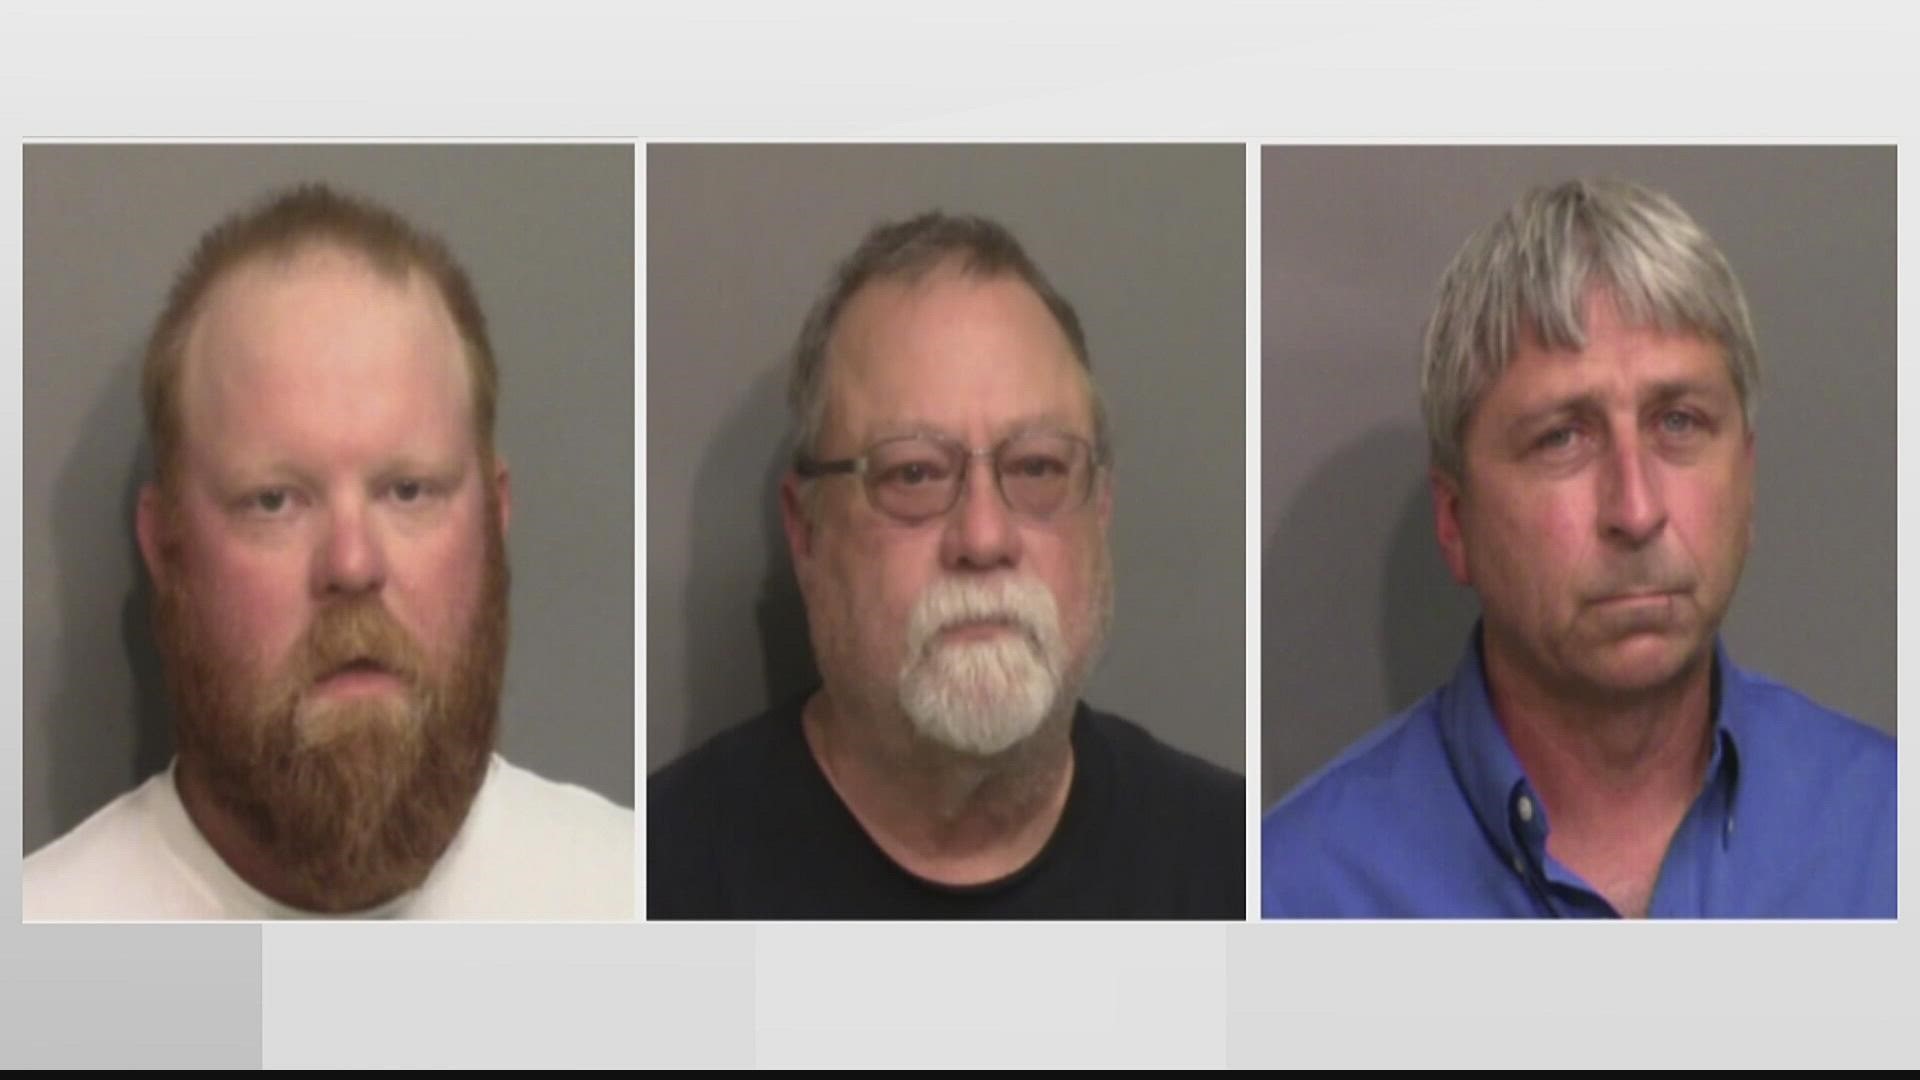 Travis McMichael, his father Greg McMichael, and a neighbor, William “Roddie” Bryan, are being sentenced on federal hate crime charges.